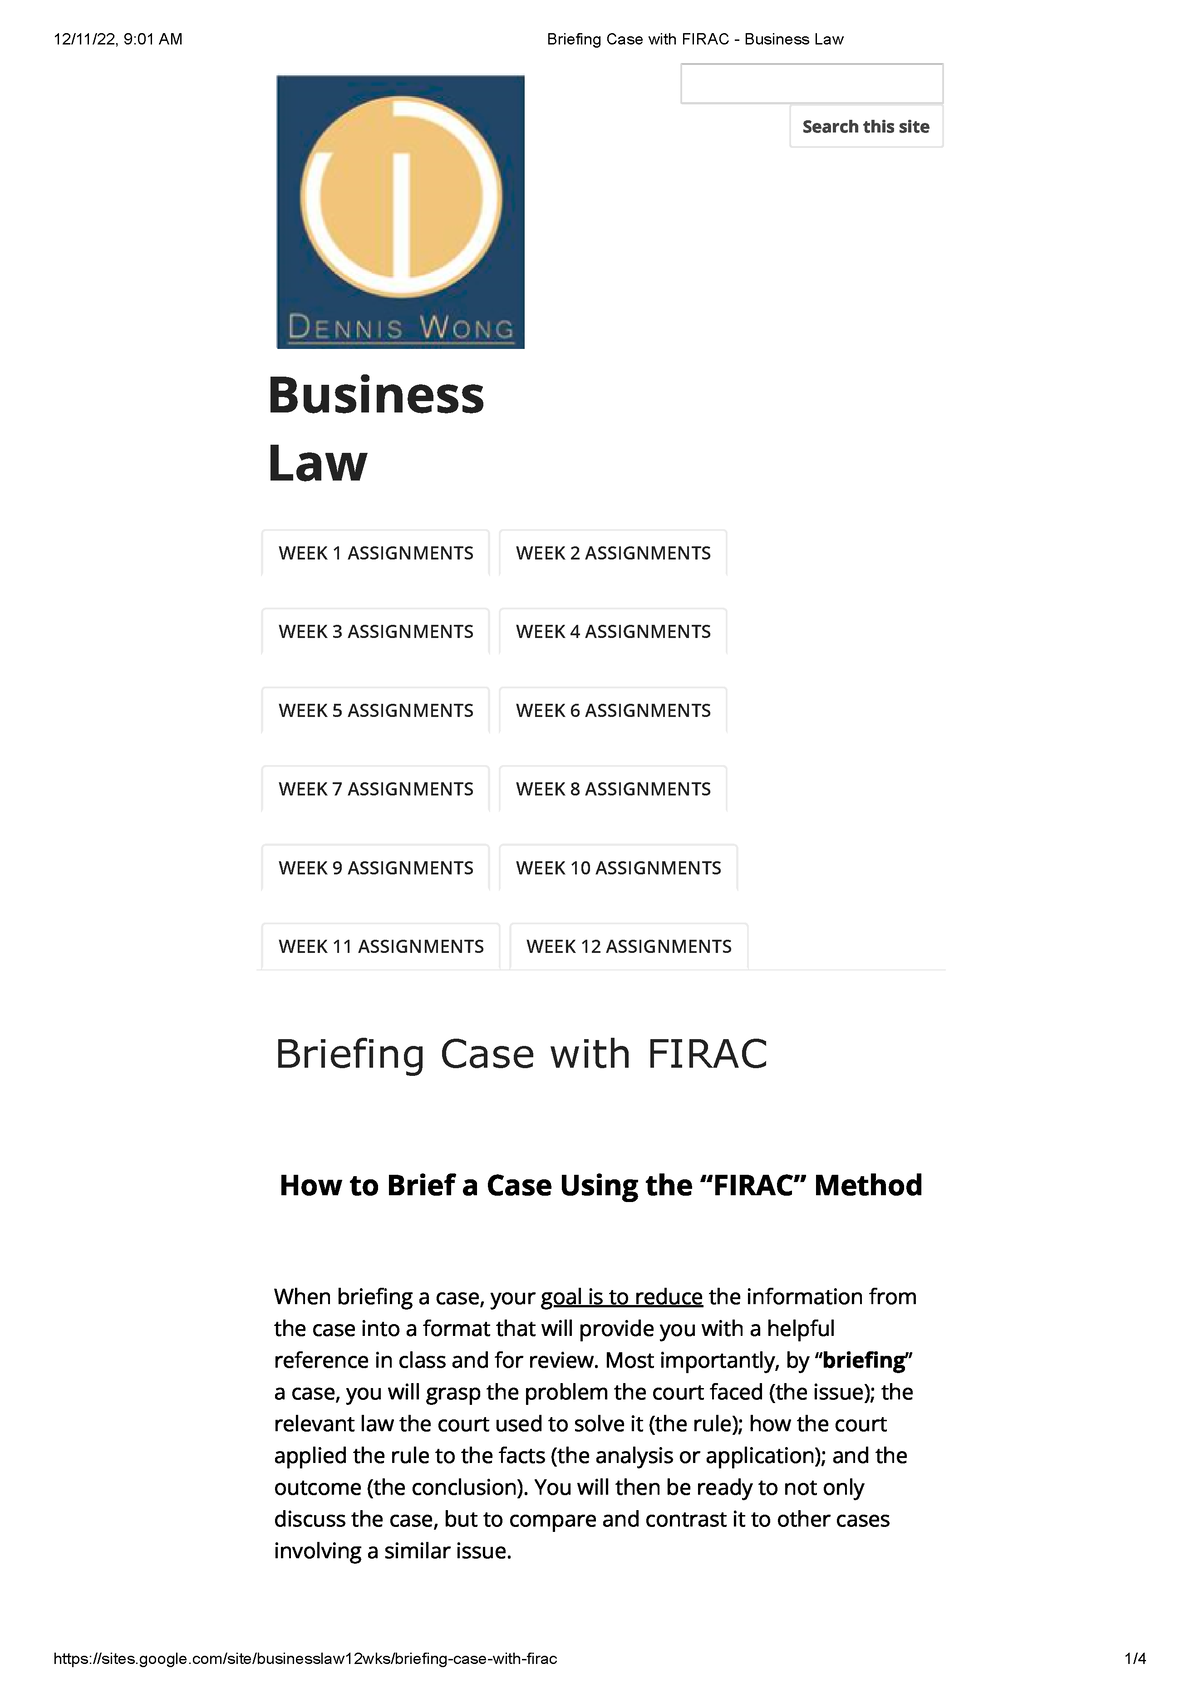 1-briefing-case-with-firac-business-law-business-law-week-1